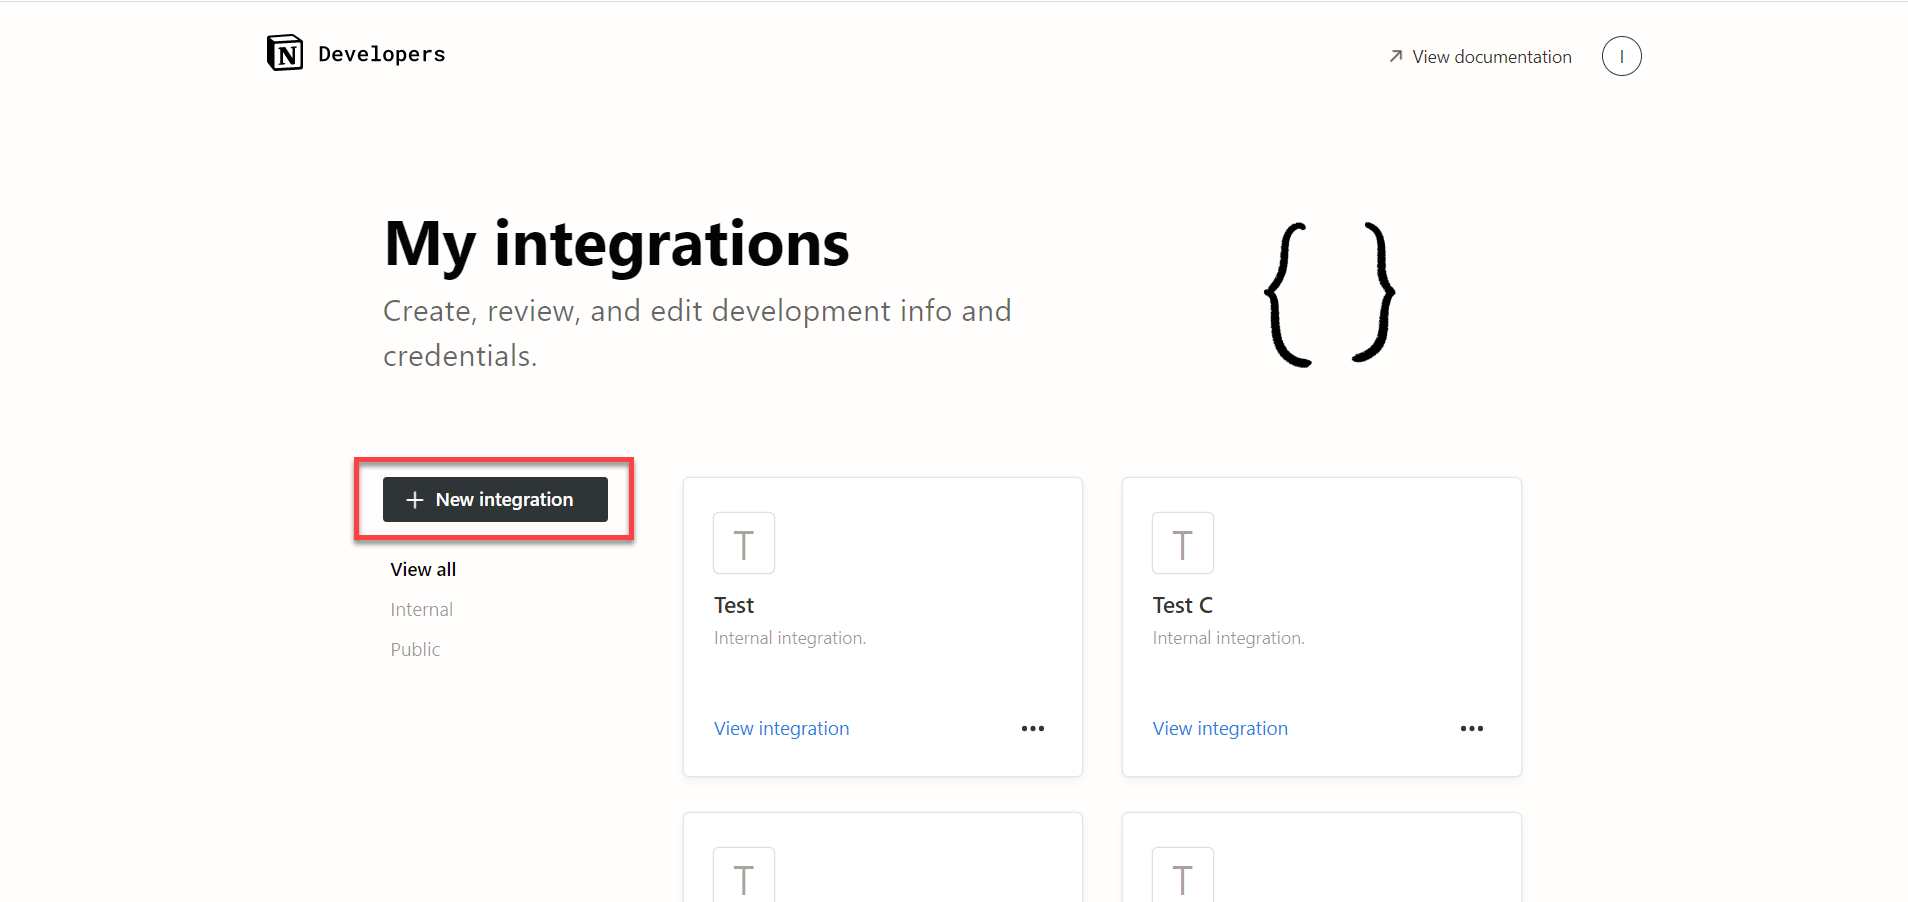 New Power-Ups! Integrations With GitLab, JotForm, OneDrive & More